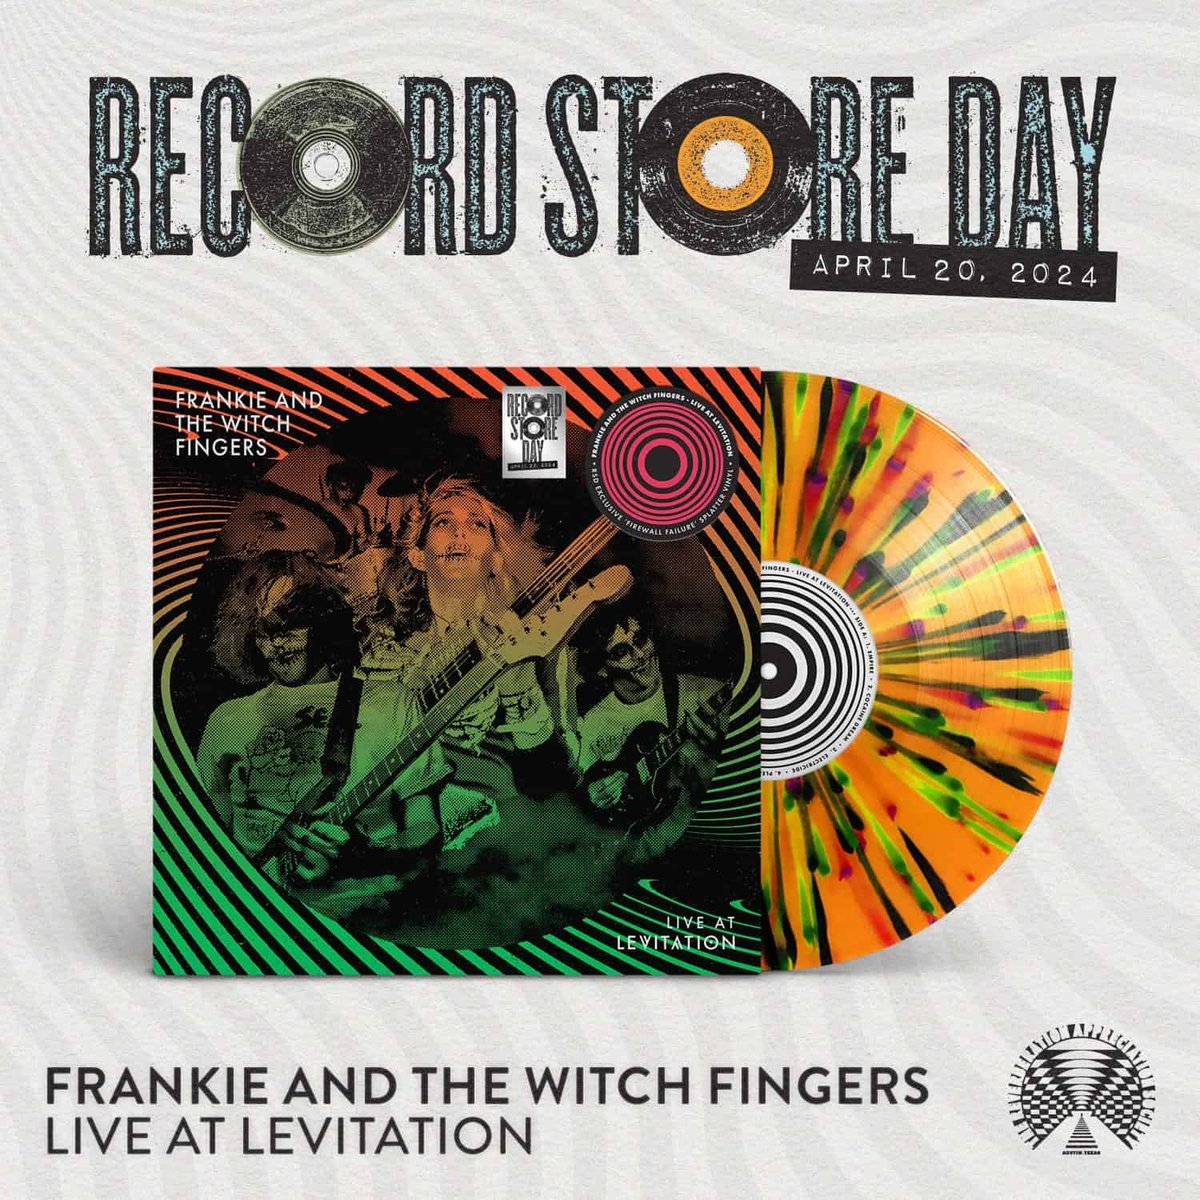 RSD 2024: 'Live At Levitation' by Frankie and the Witch Fingers The twelfth edition of Levitation's ongoing live series of releases comes from the garage-psych mutants with their 2022 performance. @thewitchfingers @RVRBRECORDS @LEVITATION normanrecords.com/records/202355…